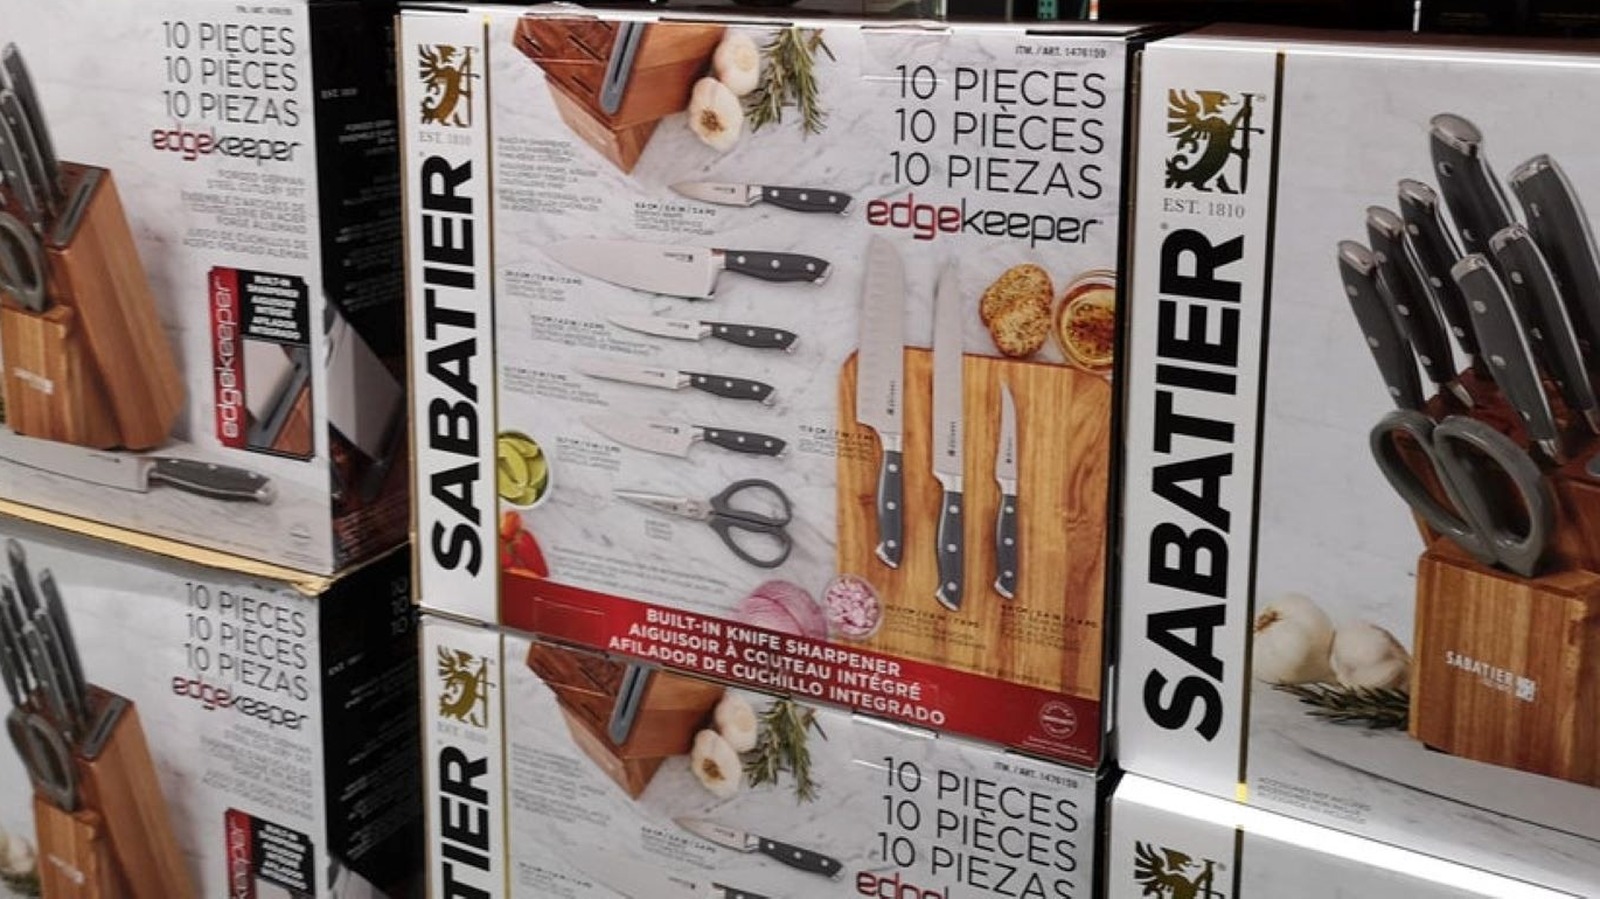 https://www.mashed.com/img/gallery/why-costco-shoppers-think-you-should-avoid-this-kitchen-knife-set/l-intro-1632427080.jpg